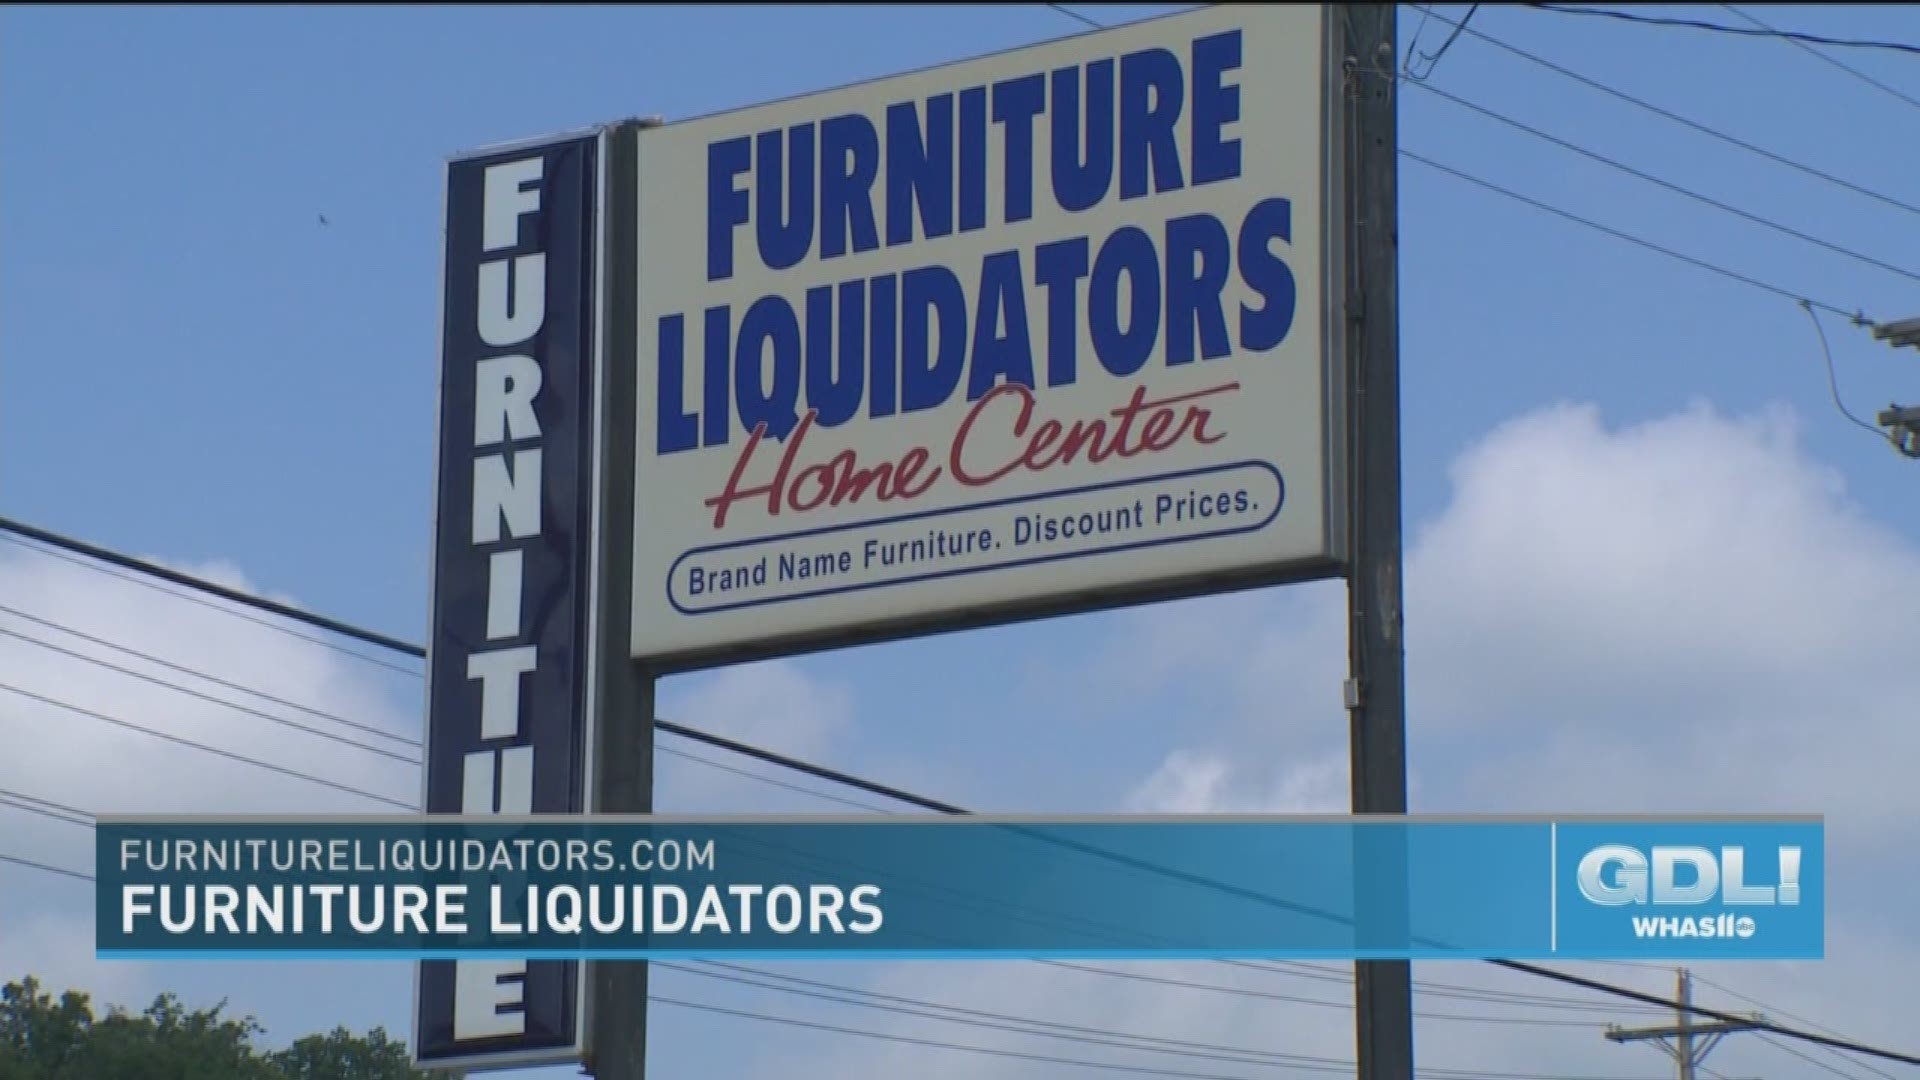 Furniture Liquidators is offering sales of up to 60% to clear inventory and make room for a whole new line of FFO Home products.